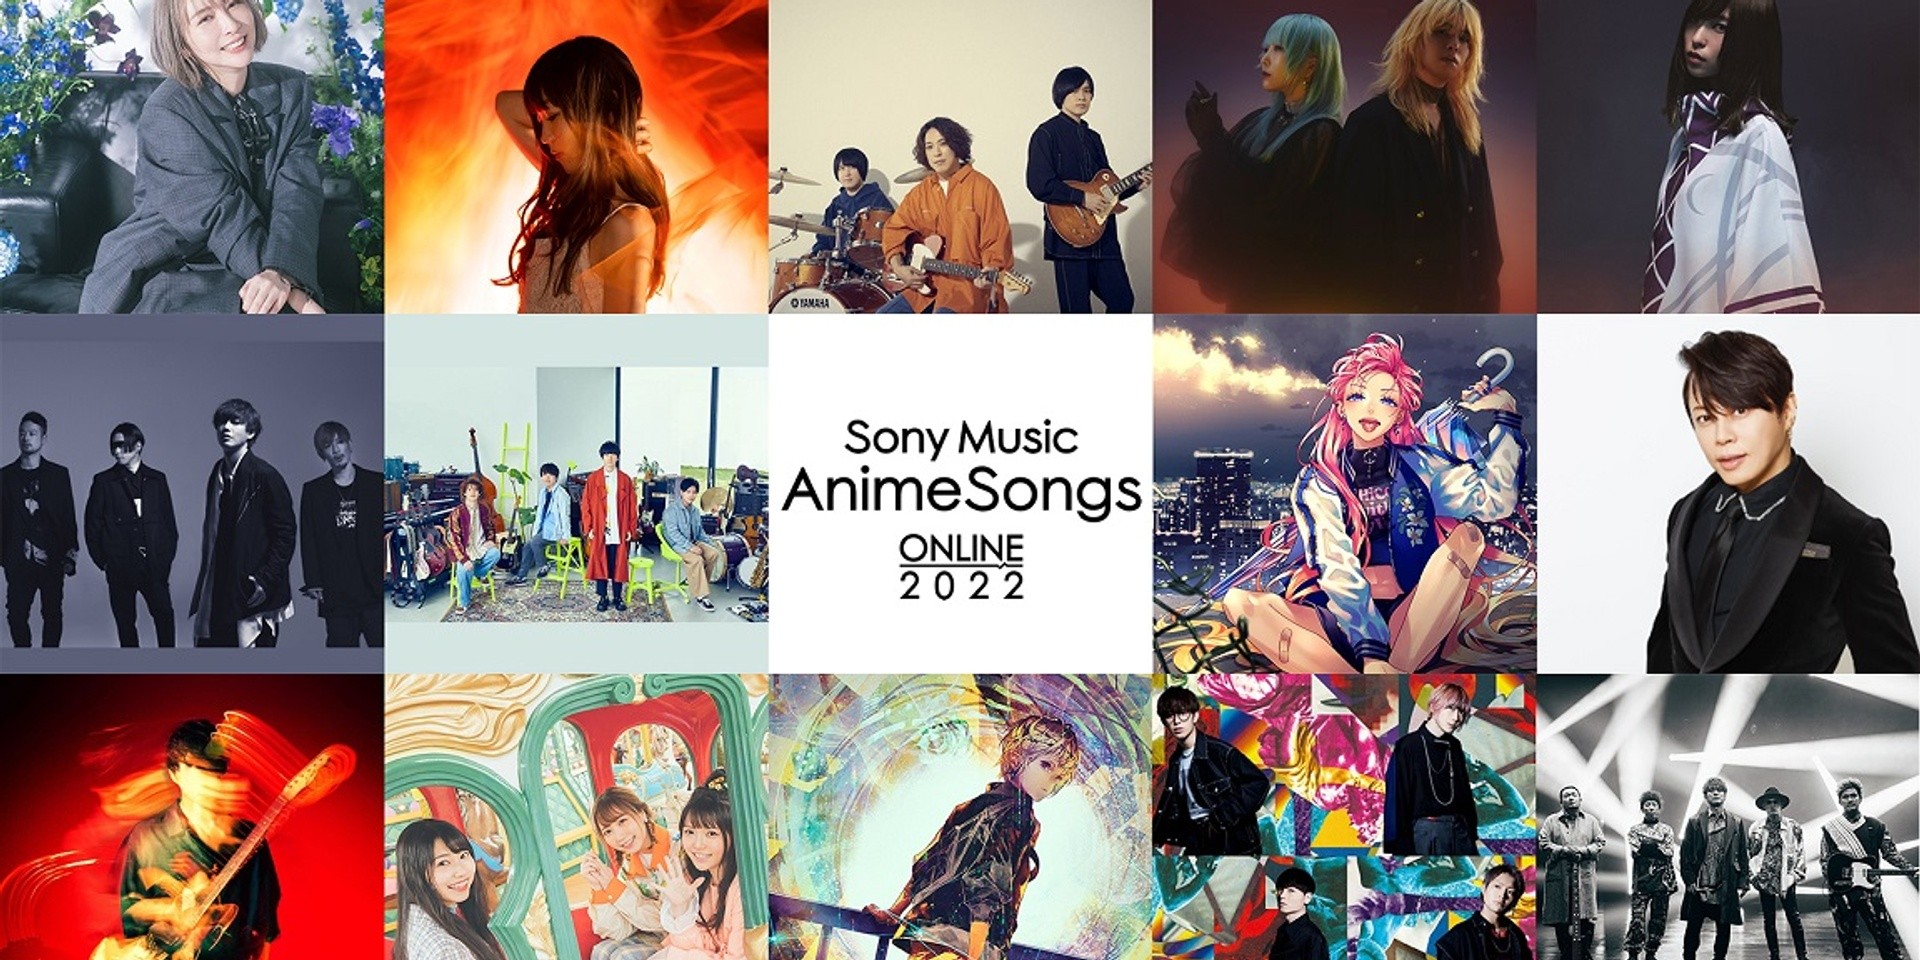 Sony Music AnimeSongs ONLINE 2022 to feature 14 performances by popular anime OST artists KANA-BOON, SPYAIR, BLUE ENCOUNT, and more